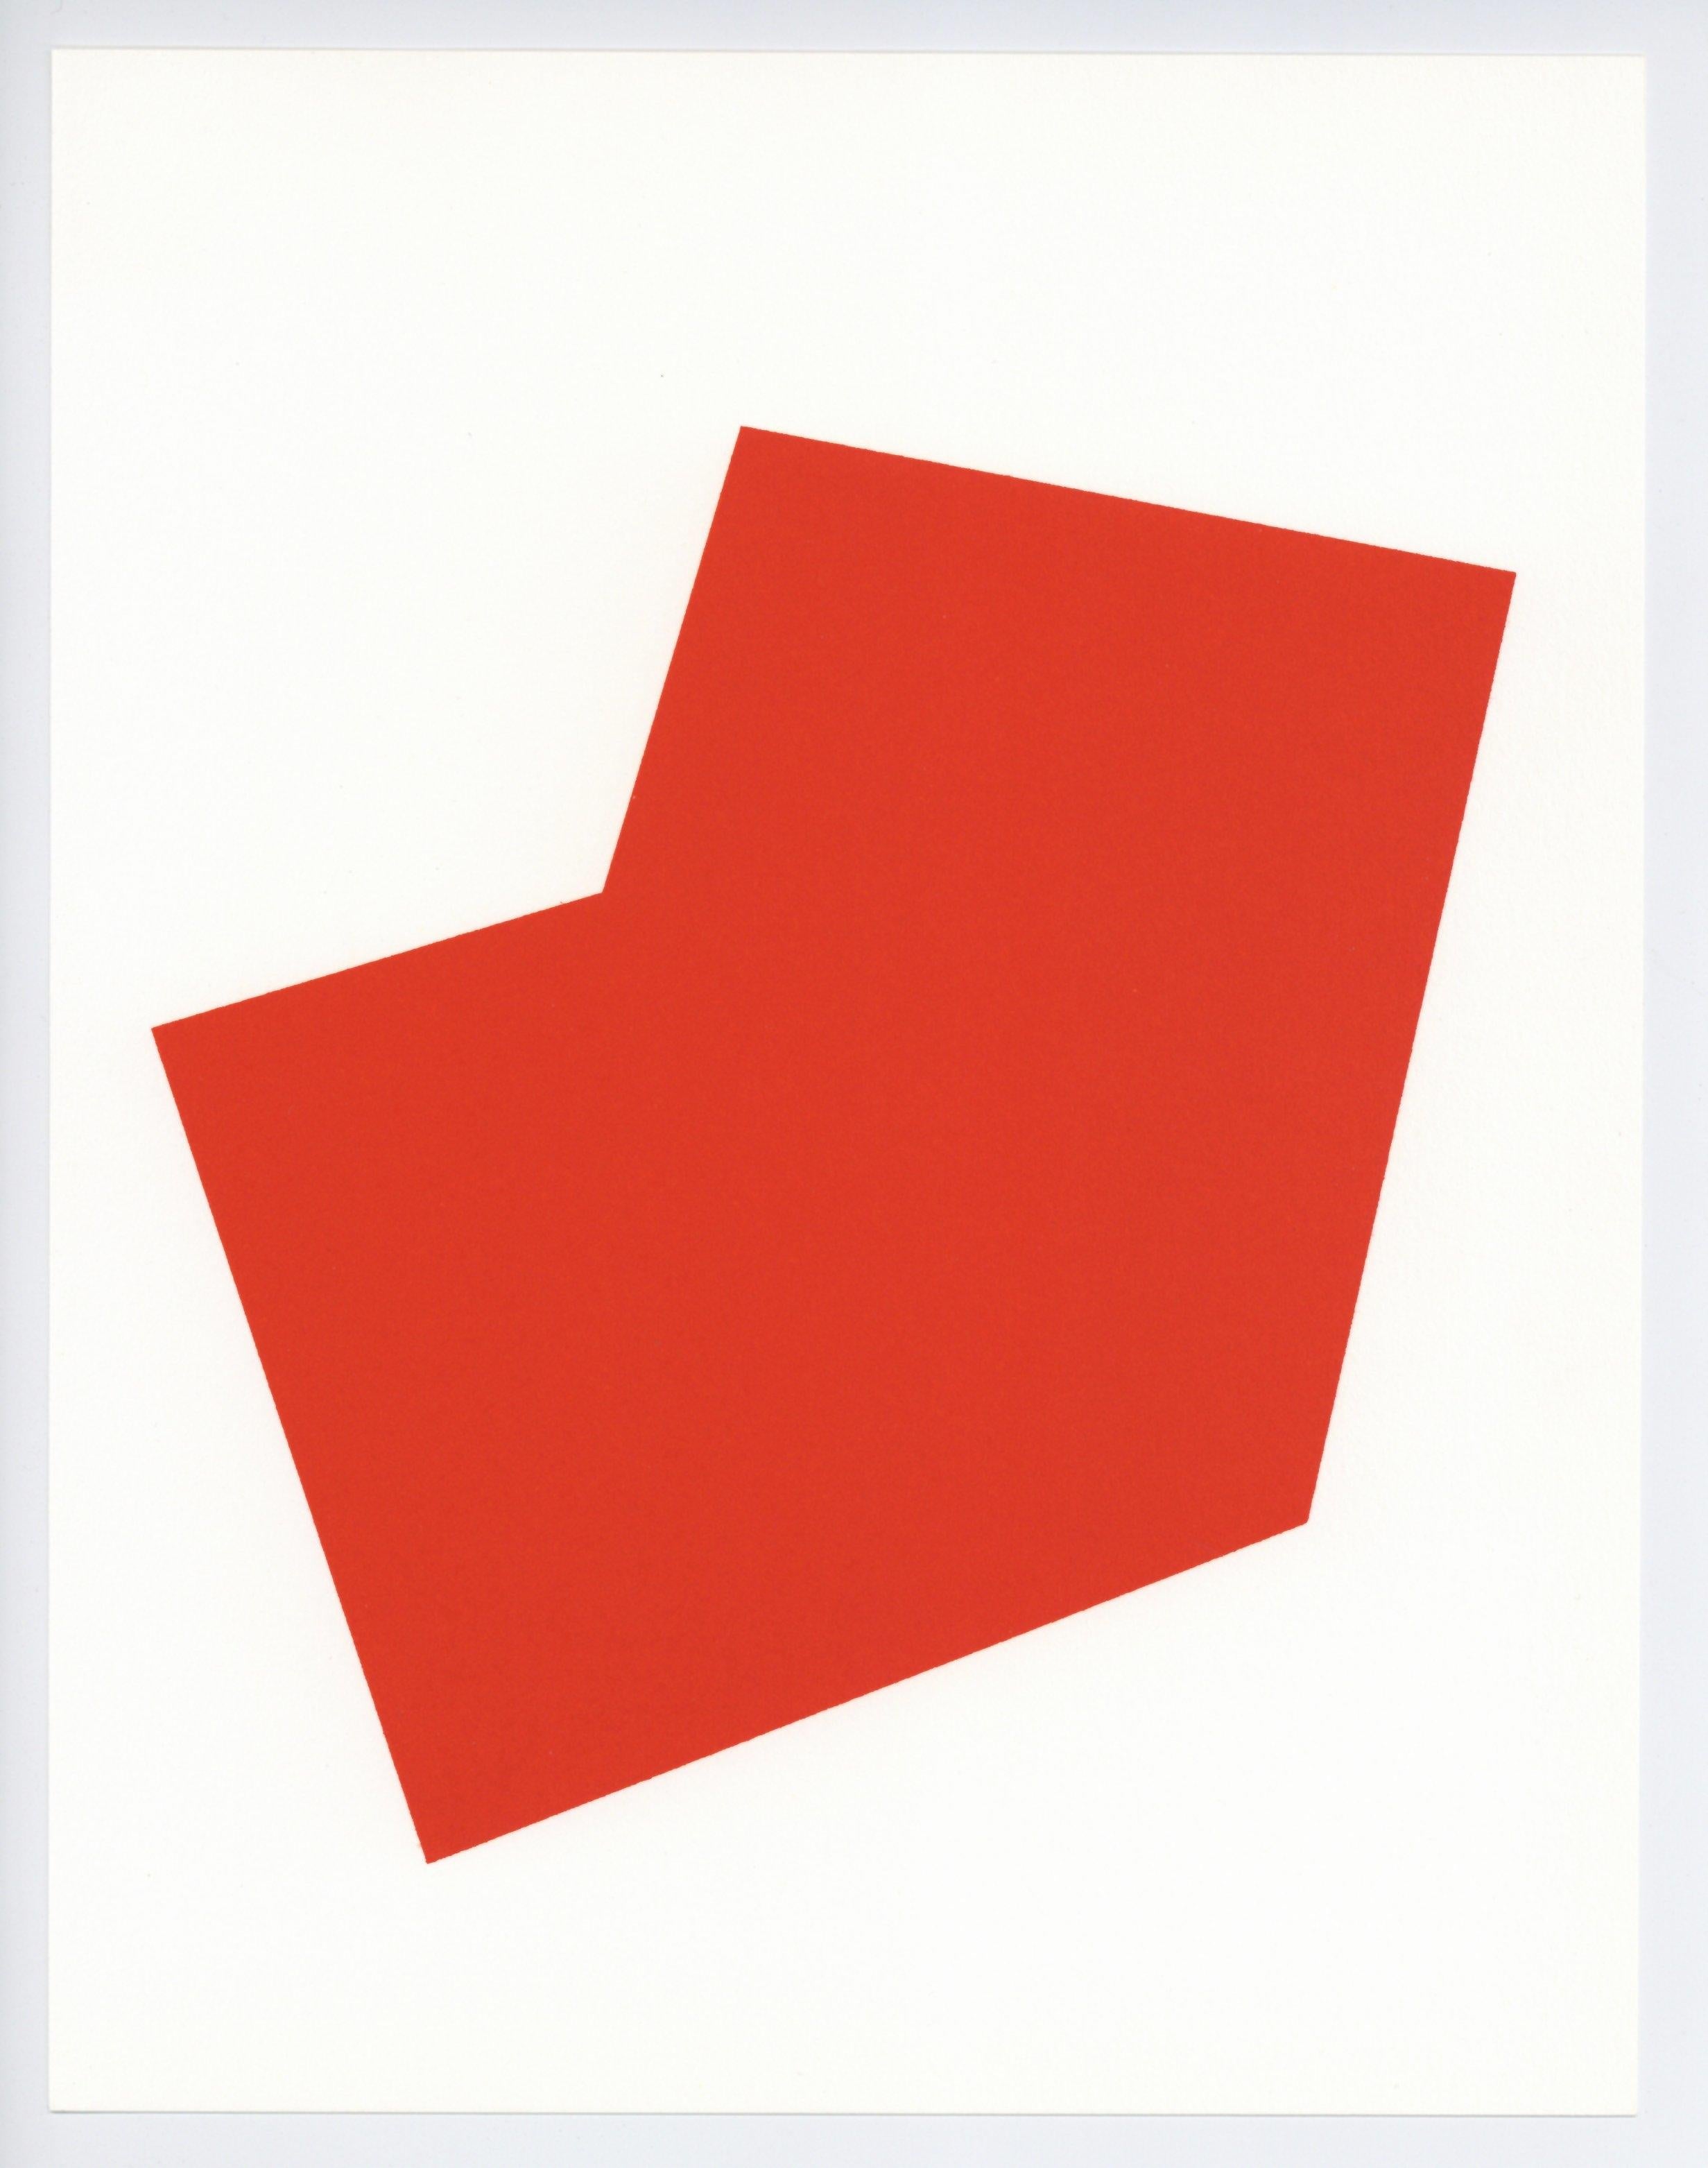 What is Ellsworth Kelly best known for?